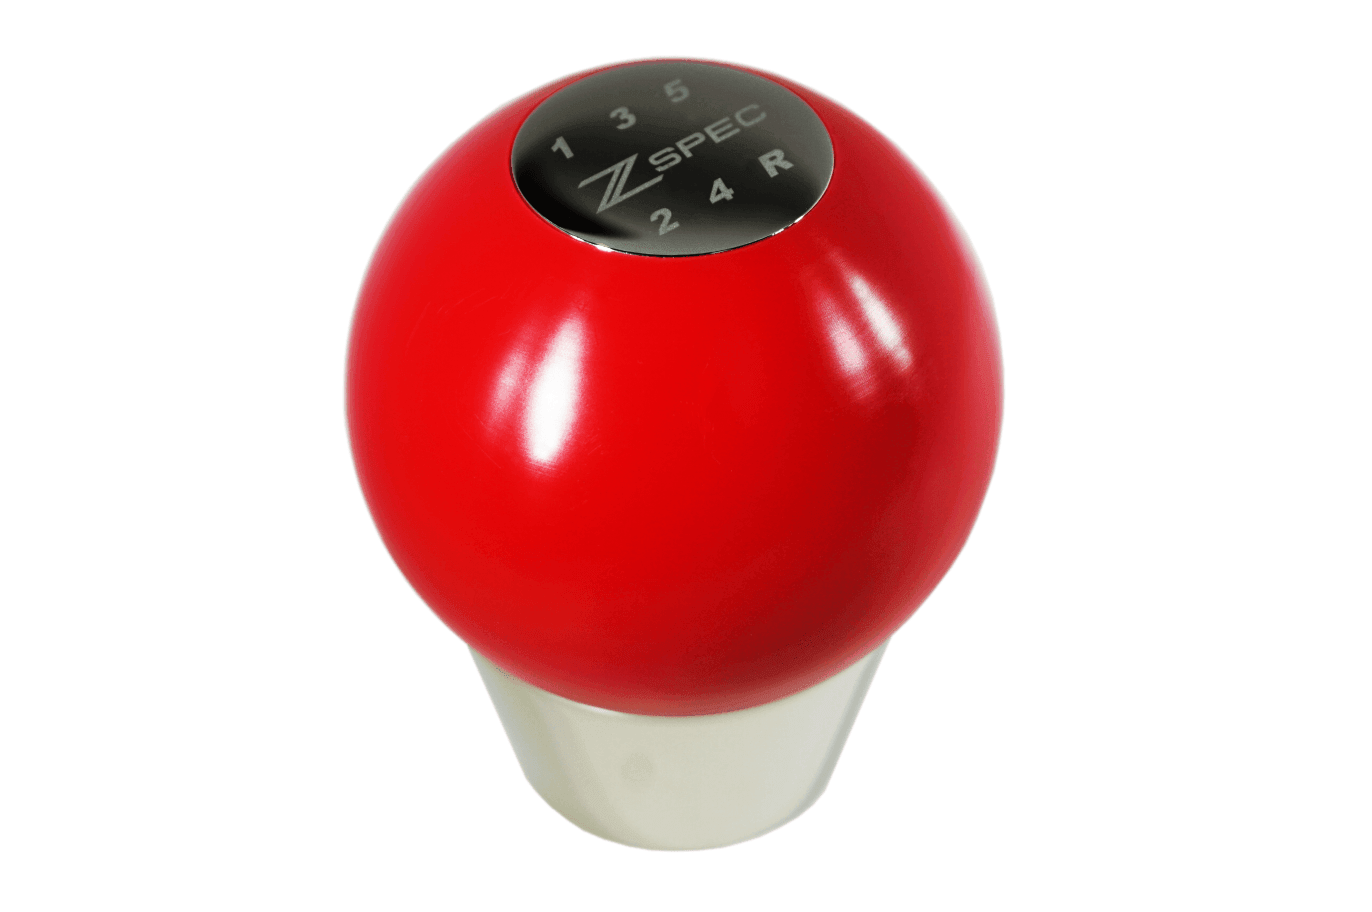 ZSPEC Shift Knob, M8-1.25, Delrin & Stainless, 5-Speed Shift Pattern Coin  Interior Performance Upgrade Accessory Dress Up Bolts Fasteners Hardware Matters SUS304 Black Red Blue White Car Auto Vehicle